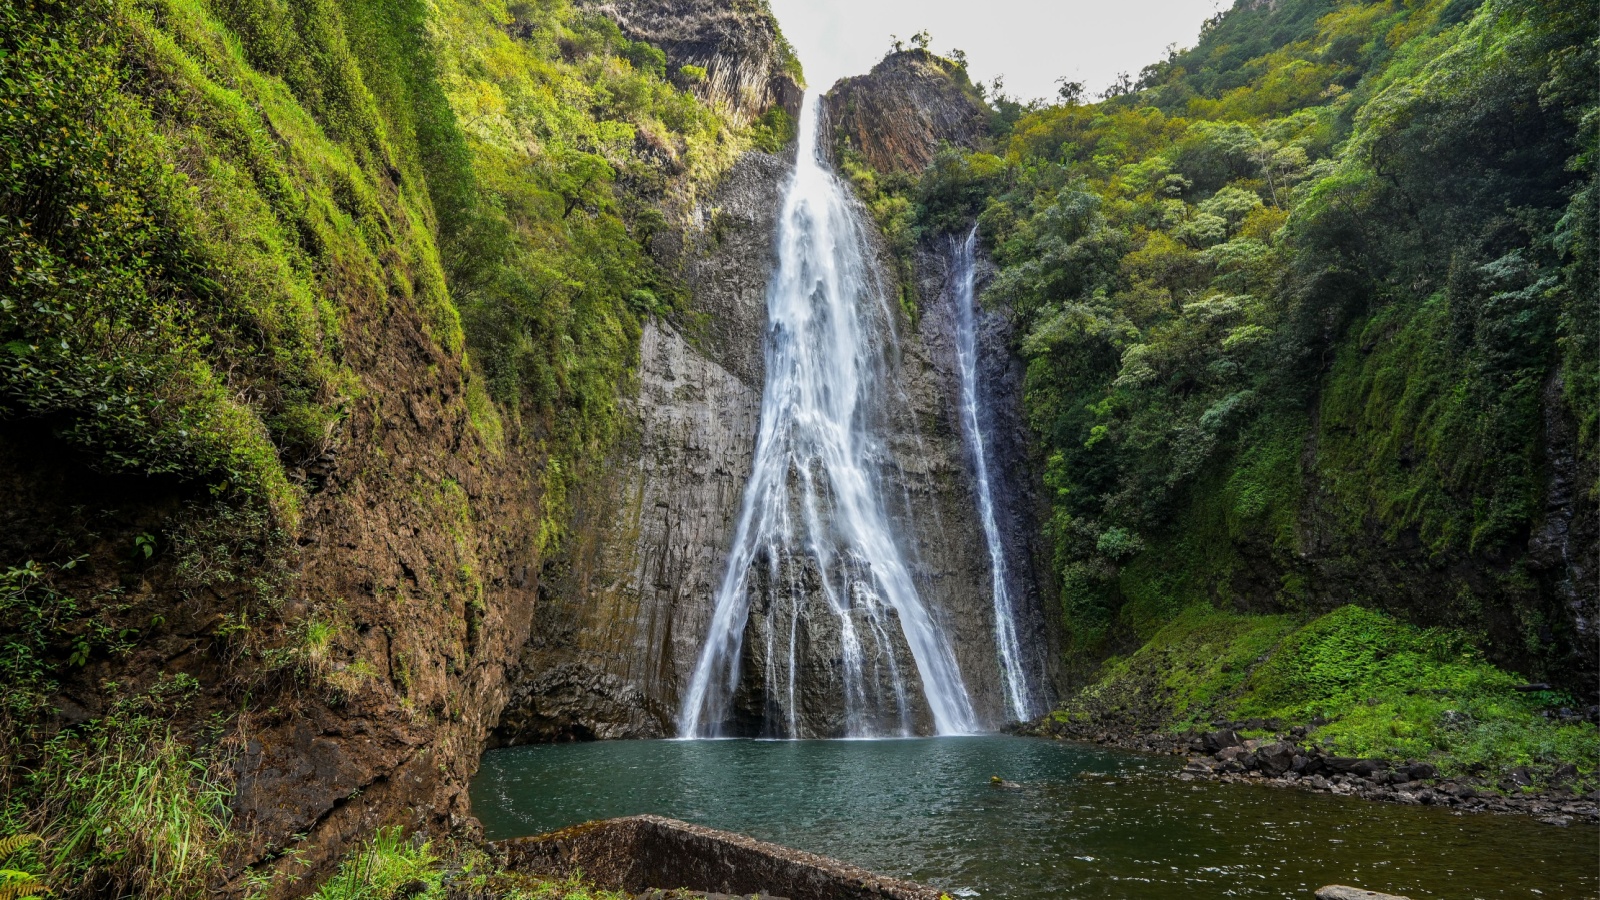 image credit: Alexandre.ROSA/Shutterstock <p>Noccalula Falls Park features a dramatic 90-foot waterfall that plunges into a lush gorge. The park offers walking trails, botanical gardens, and a historic pioneer village, making it a perfect destination for families. Legend has it that a Cherokee princess named Noccalula leaped to her death here, adding a touch of mystique to the site’s beauty.</p>